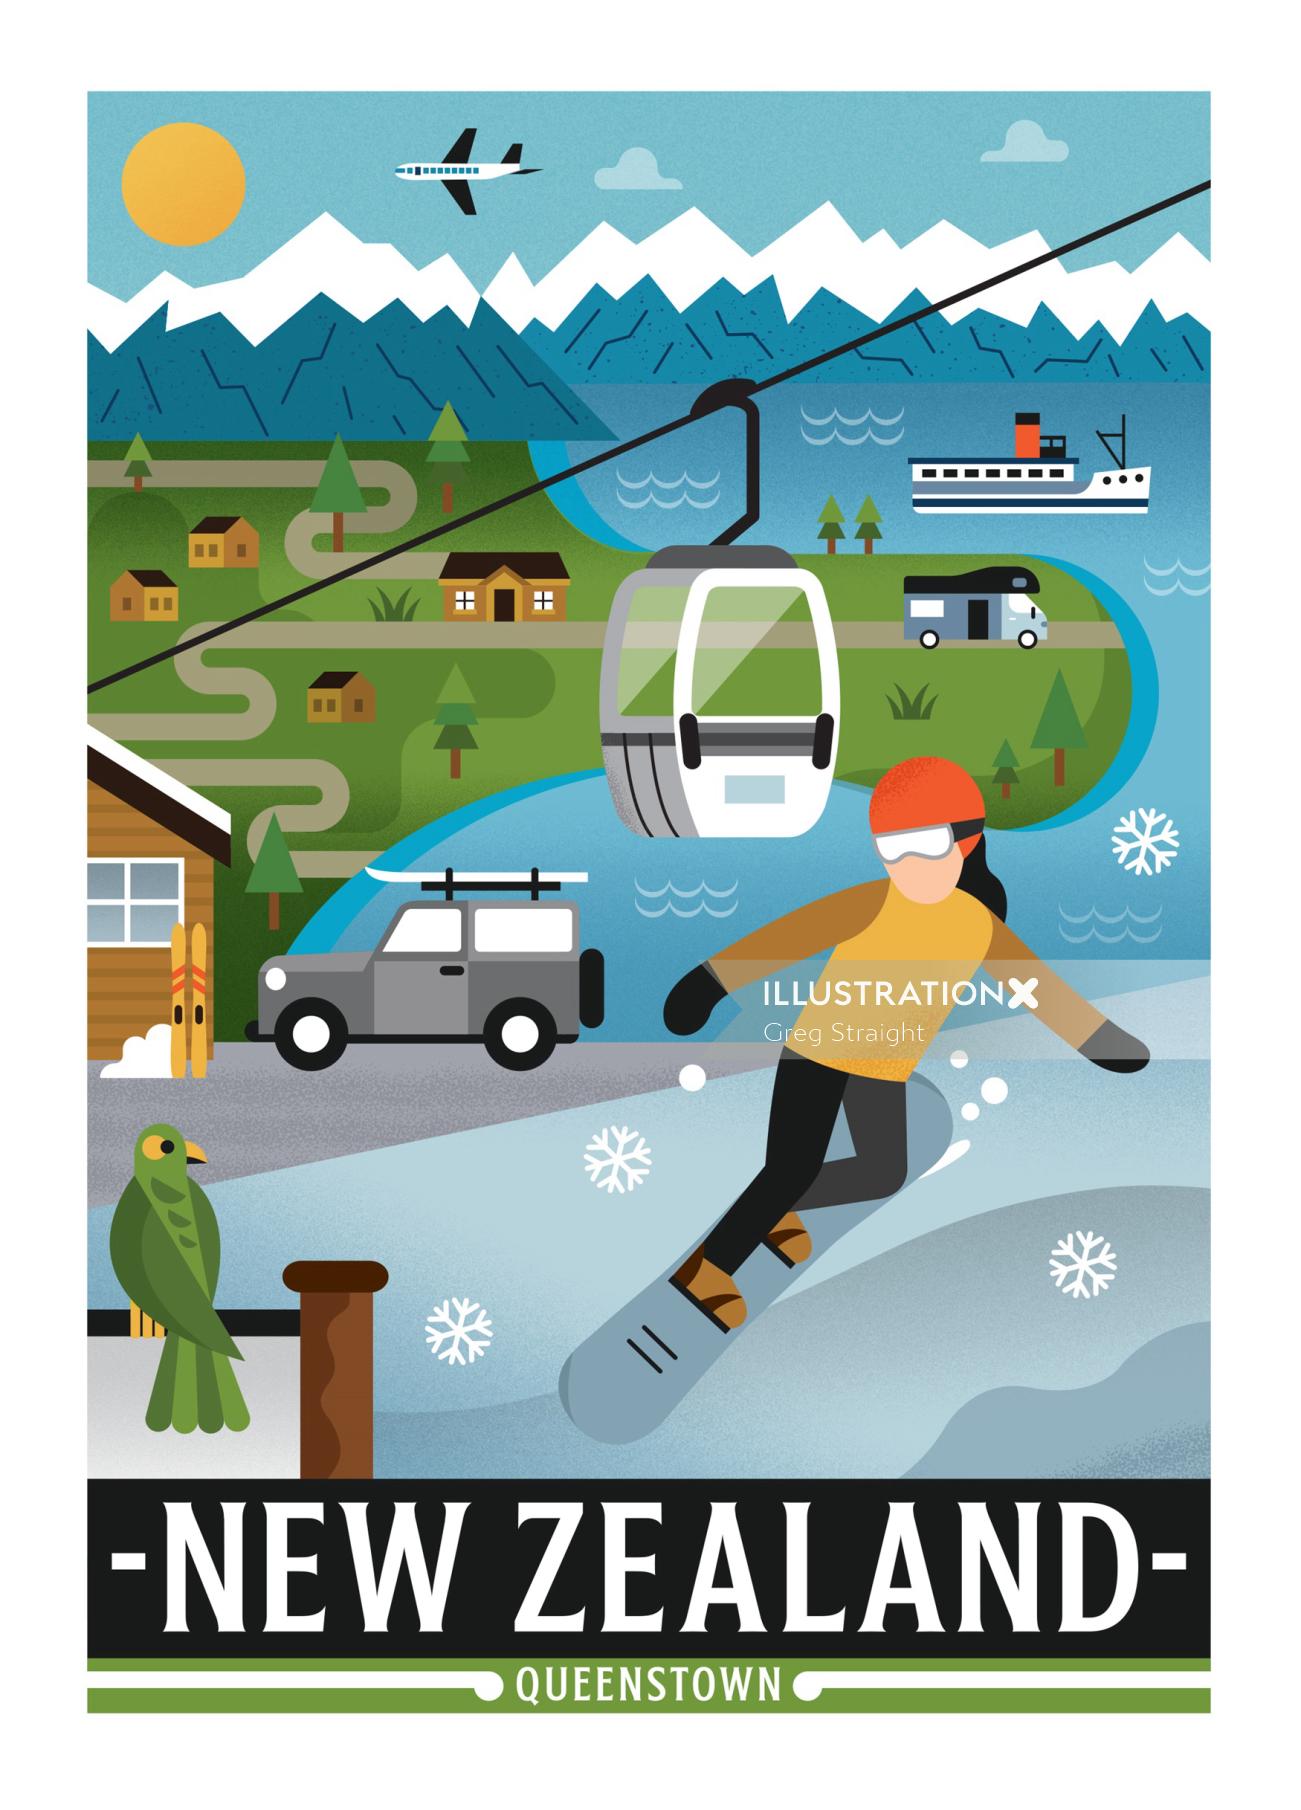 Graphic newzealand vacation poster
